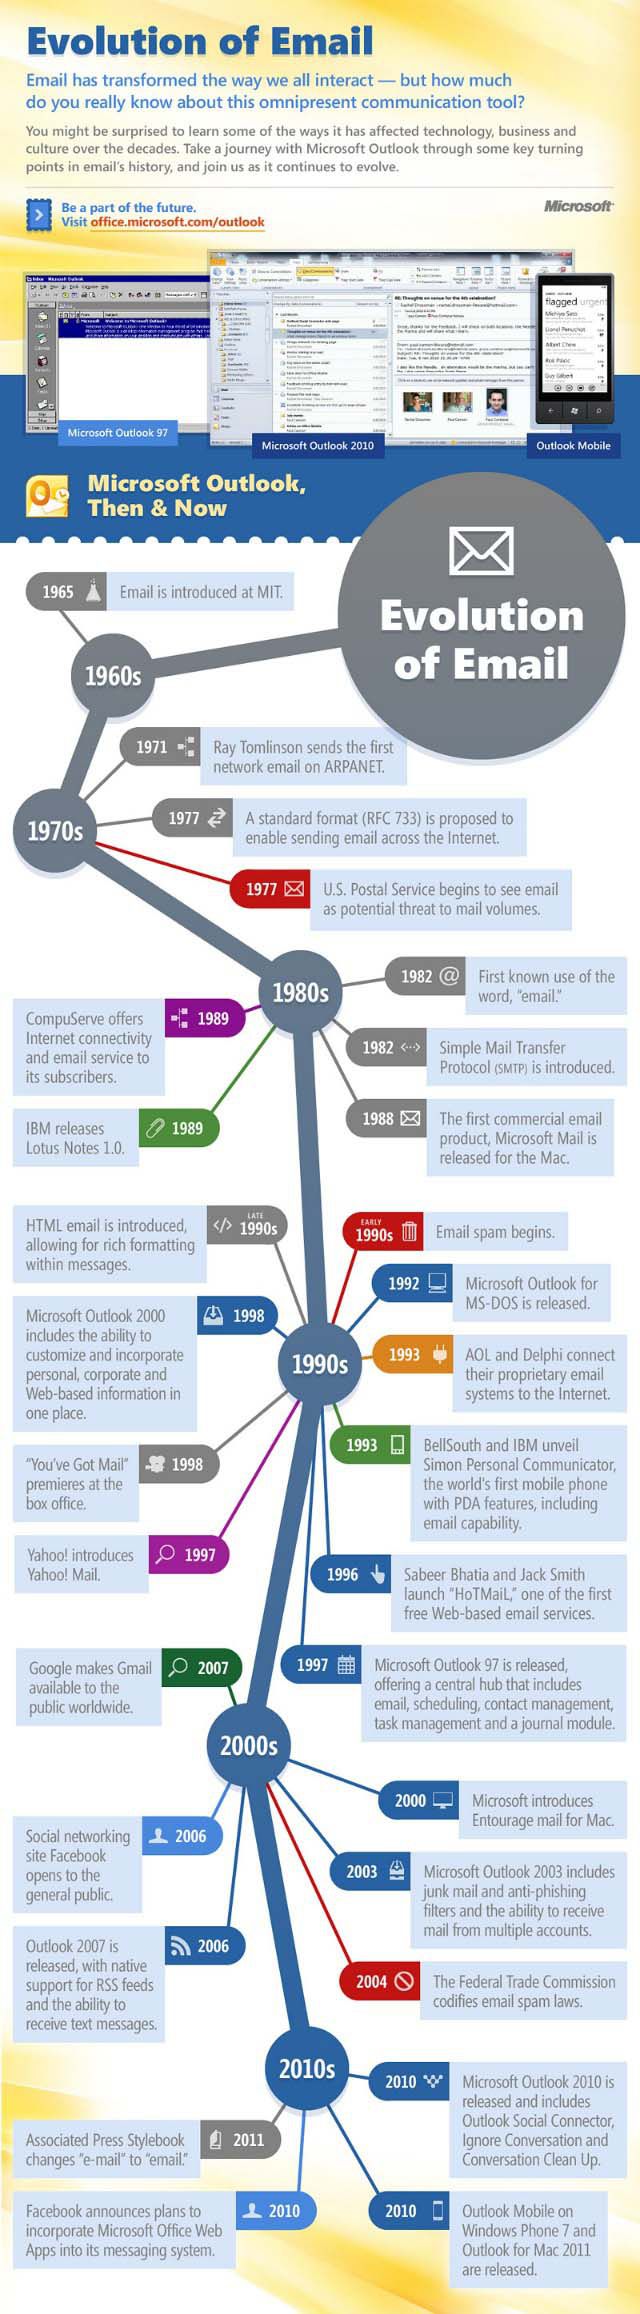 evolution-email-history